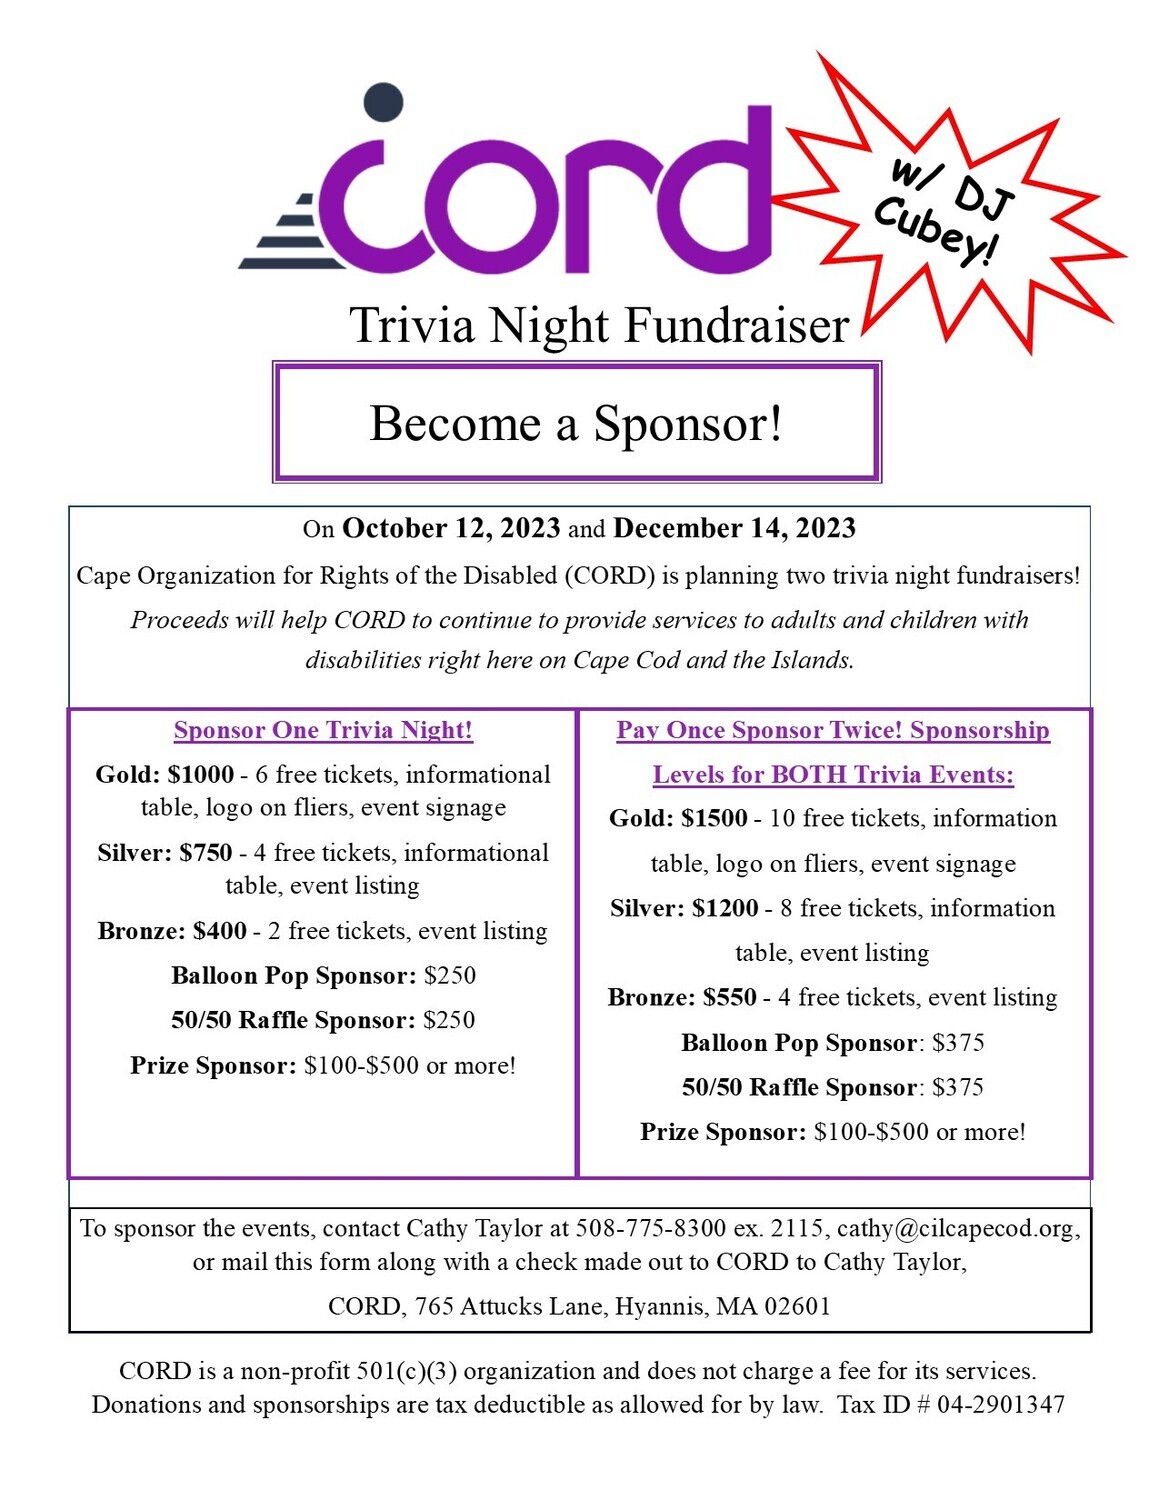 CORD Trivia Night Silver Level Sponsorship Oct 12 only